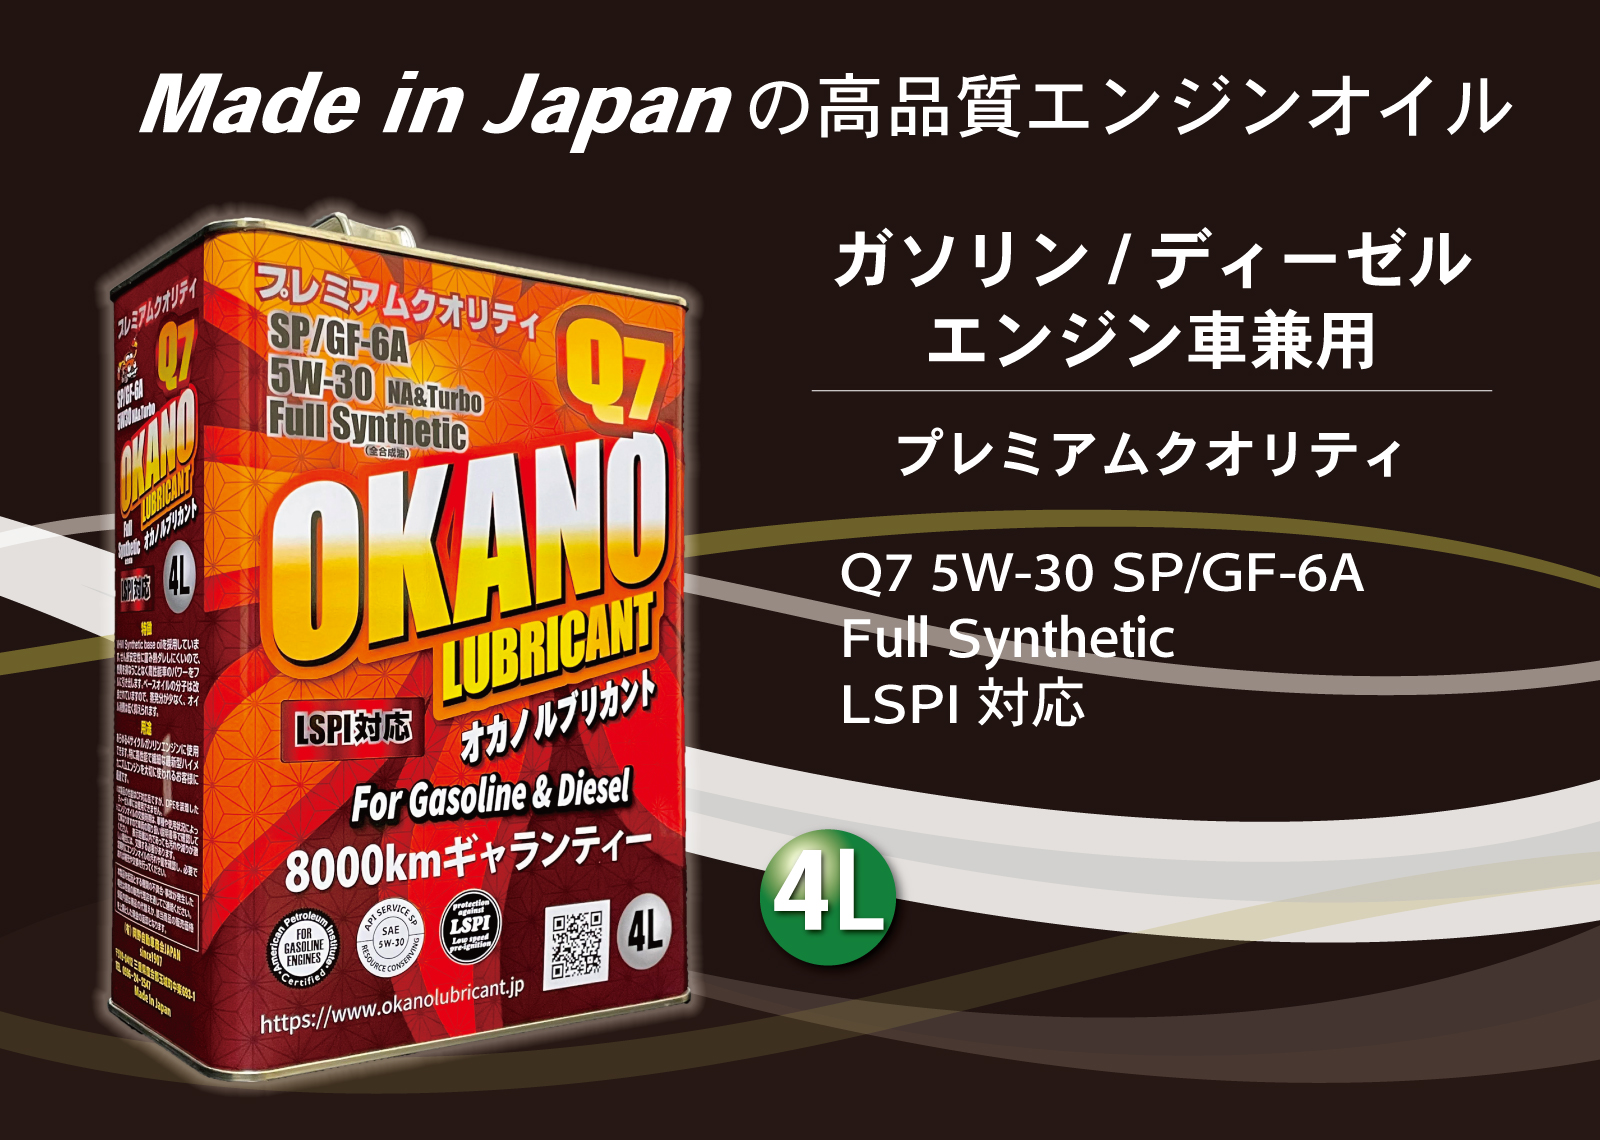 OKANO LUBRICANT Q7 5W-30 SP/GF-6A Full Synthetic LSPI